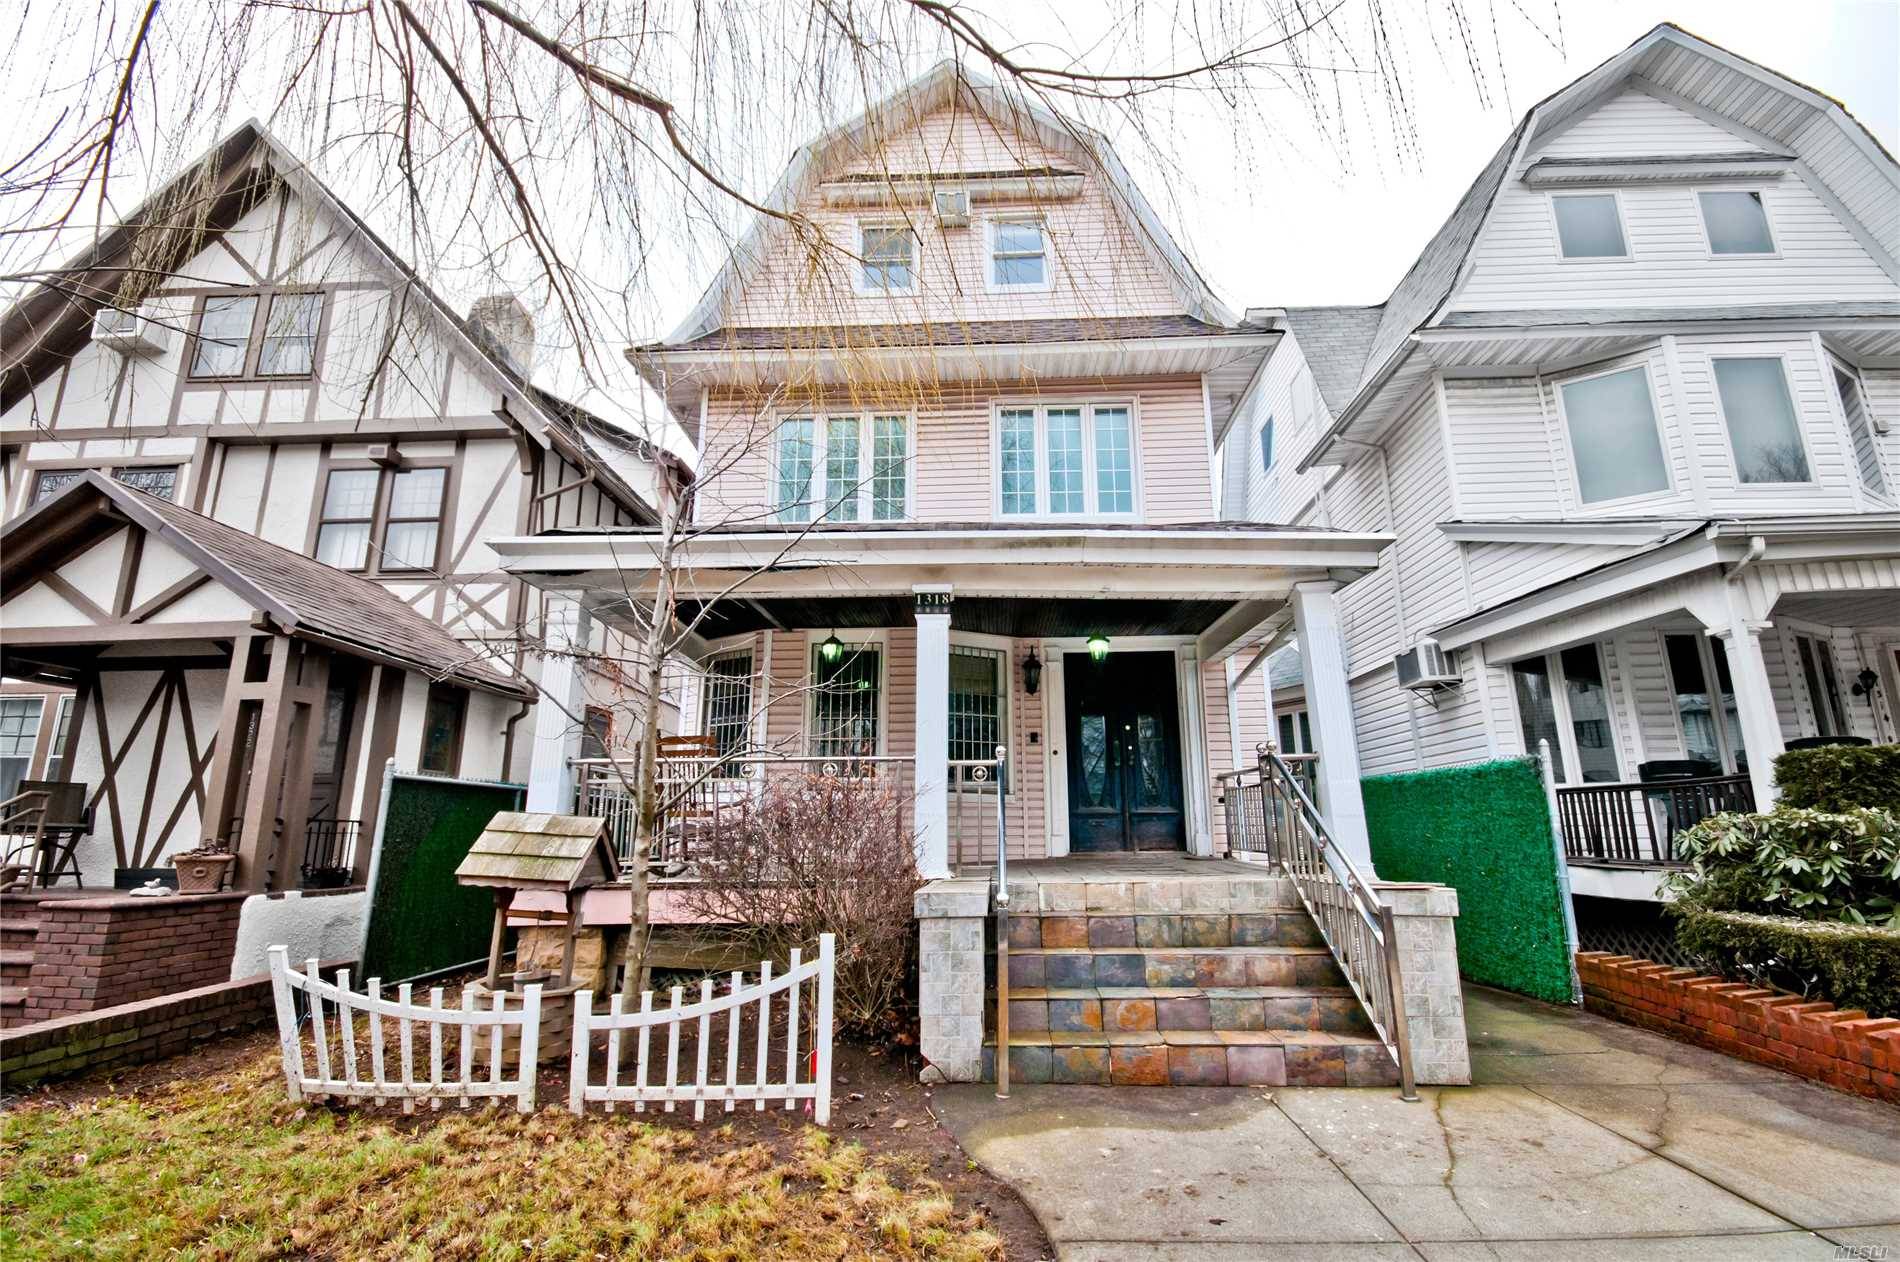 Large Victorian In Prime Location, Quaint Wrap Around Porch, 5 Bedroom Converted To 4.